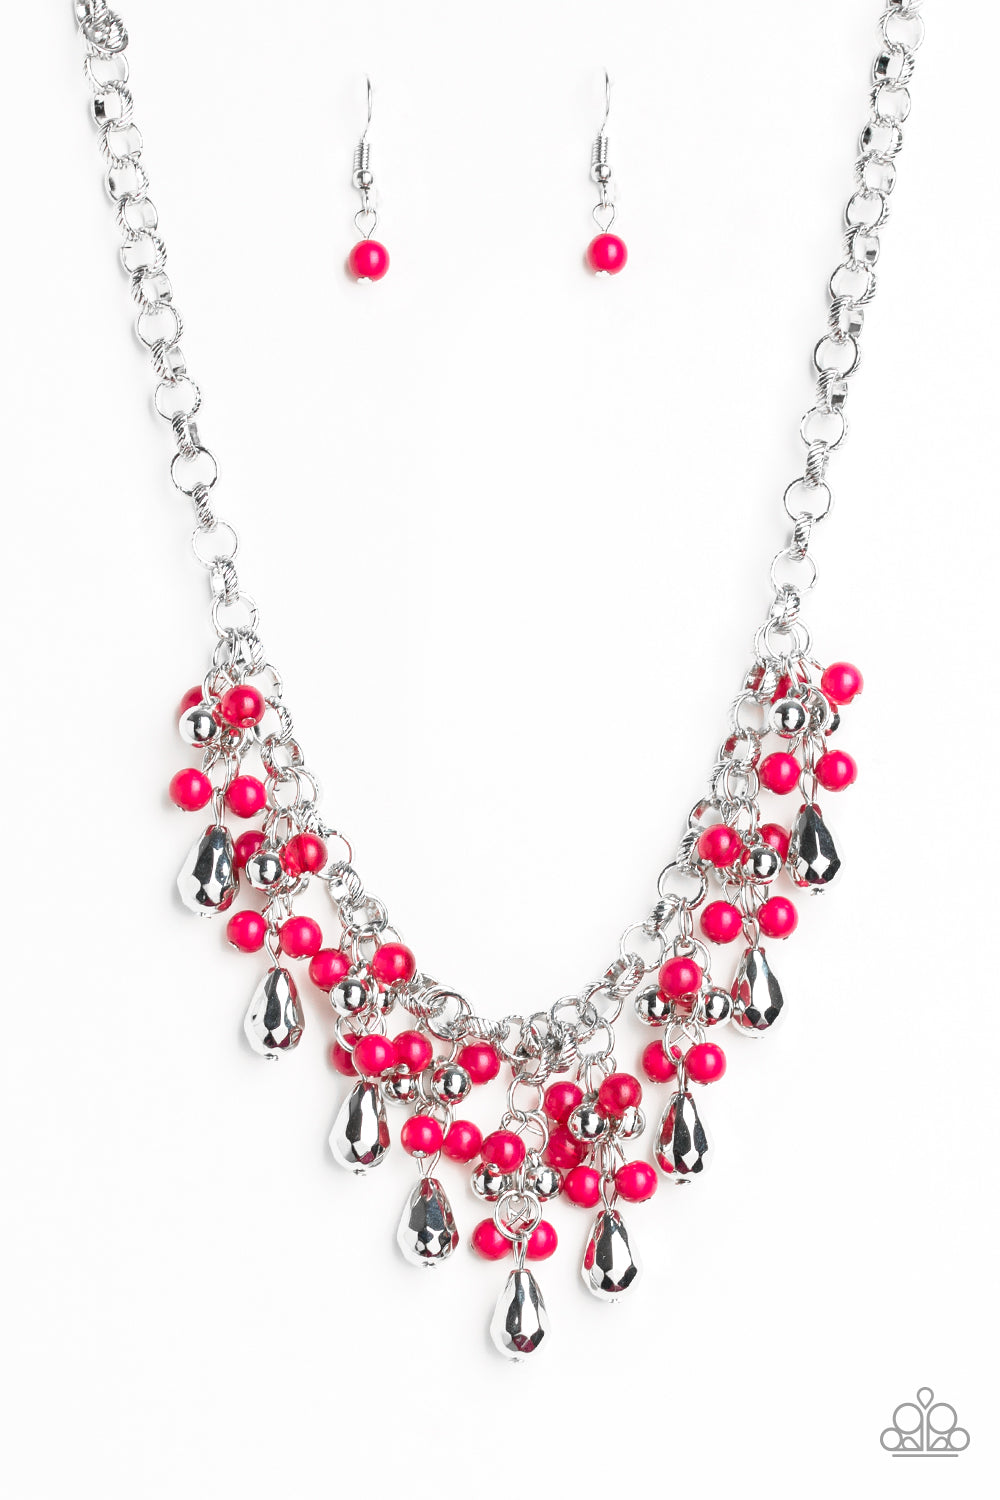 Travelling Trendsetter Pink Paparazzi Necklaces Cashmere Pink Jewels - Cashmere Pink Jewels & Accessories, Cashmere Pink Jewels & Accessories - Paparazzi